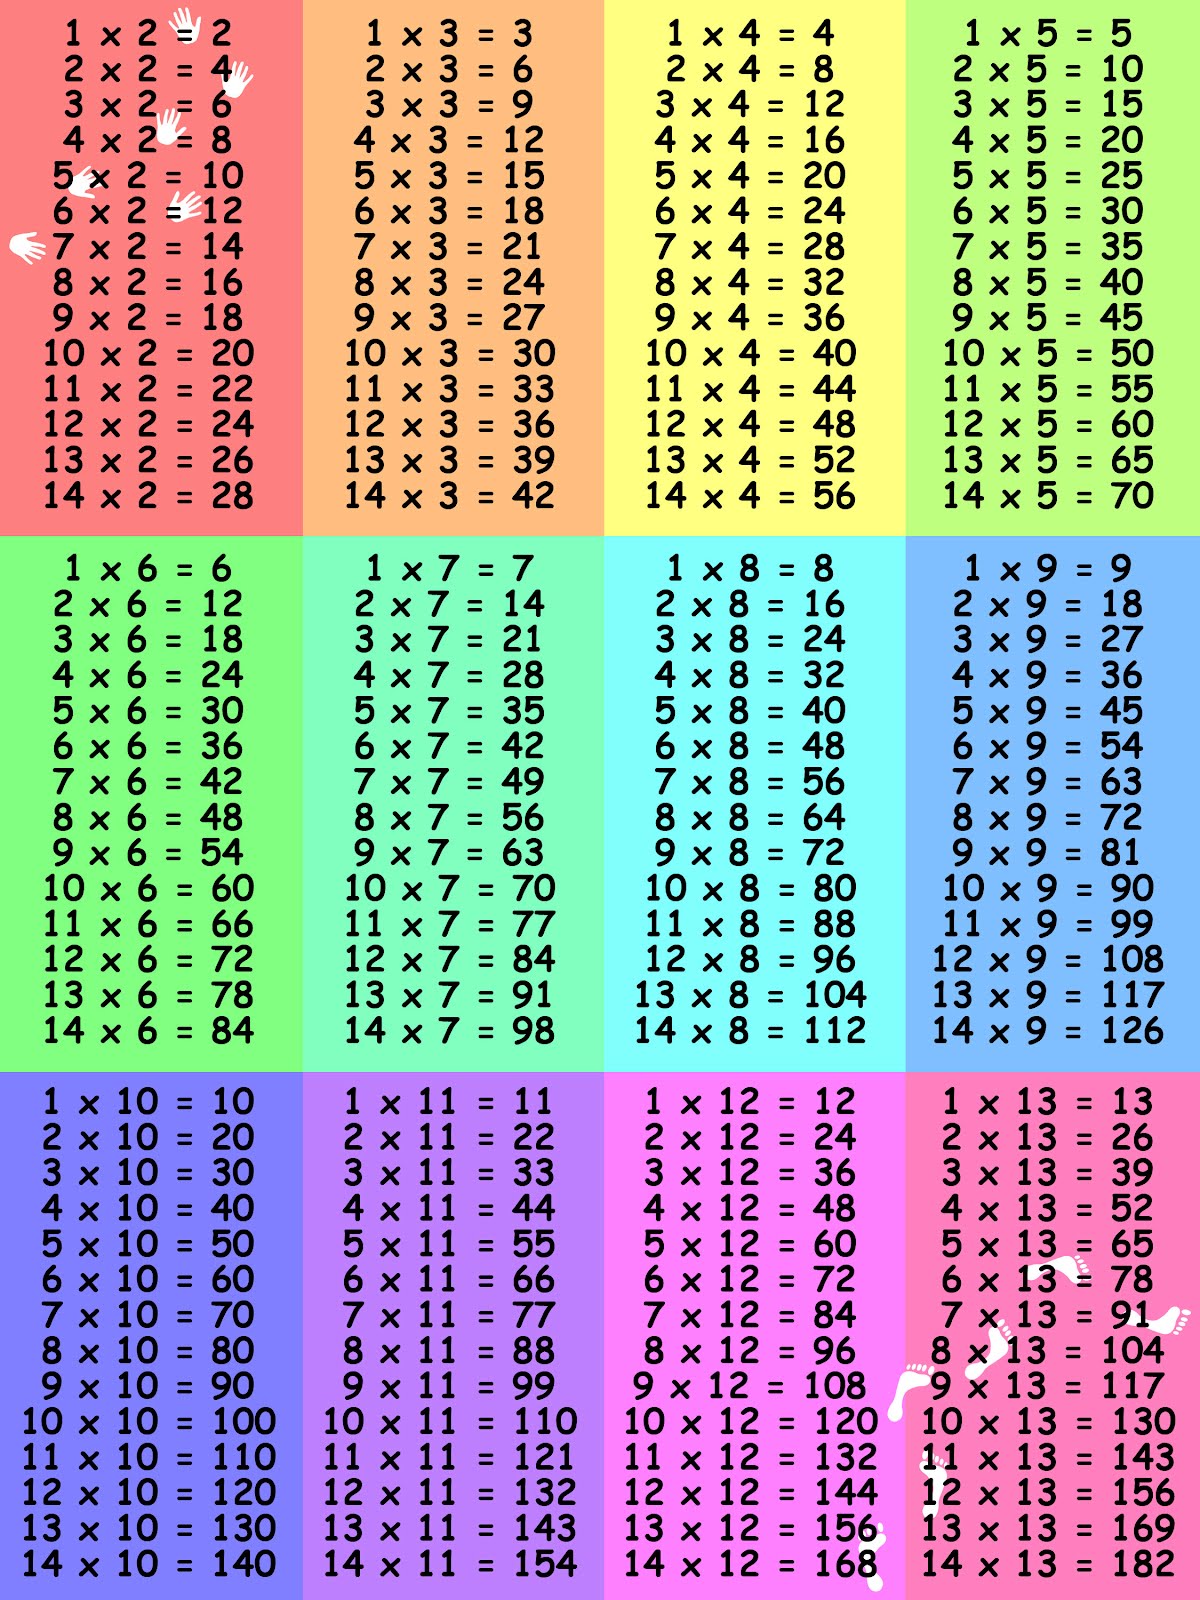 Multipalcation Table Of 30 And 30 | Search Results | Calendar 2015